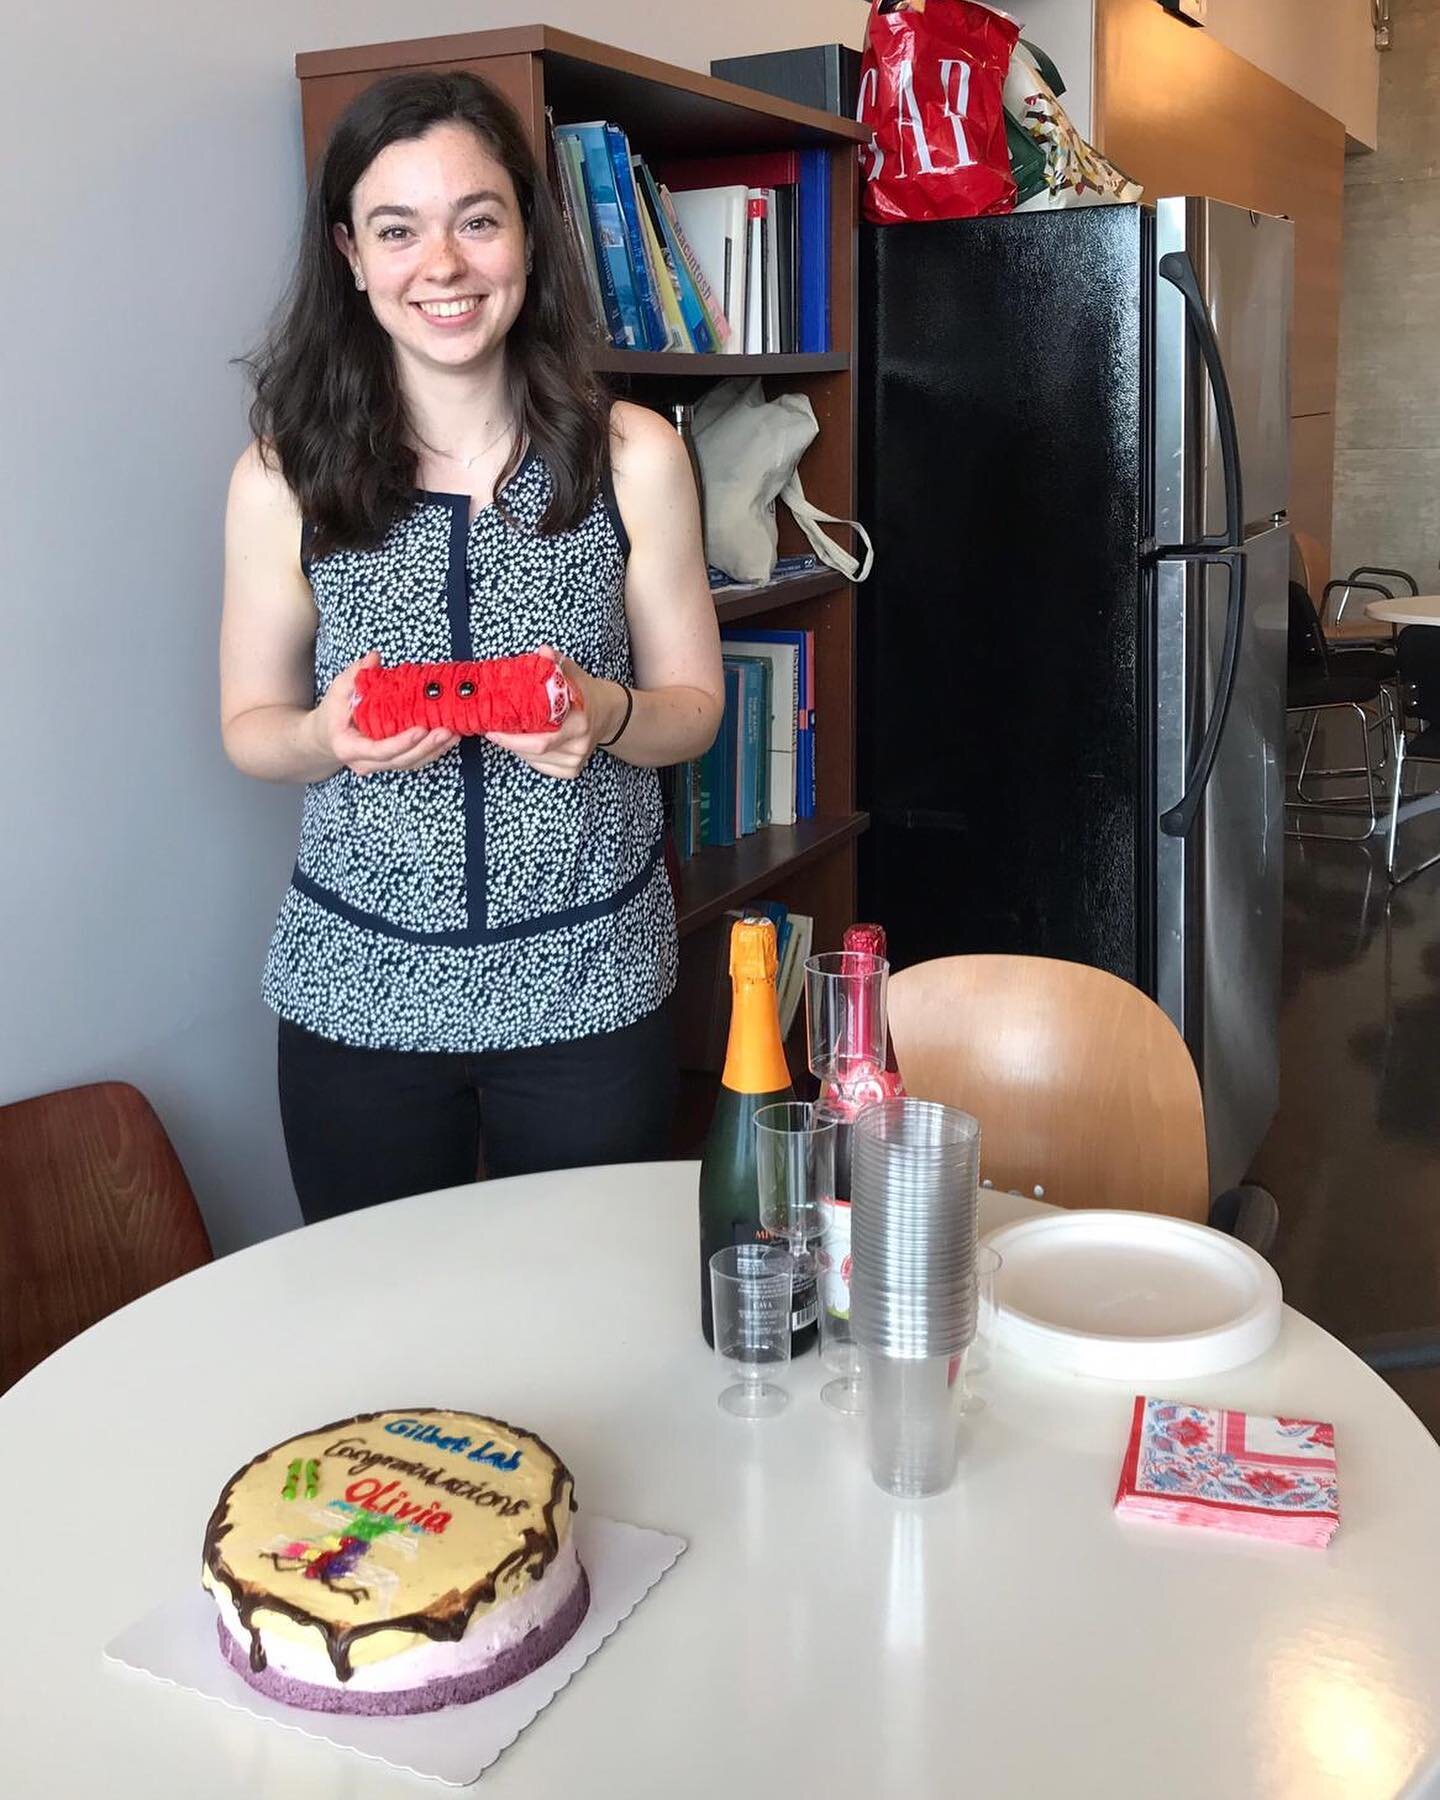 Congratulations Olivia 🎉🎉🥳 successfully presented and defended her master thesis👌